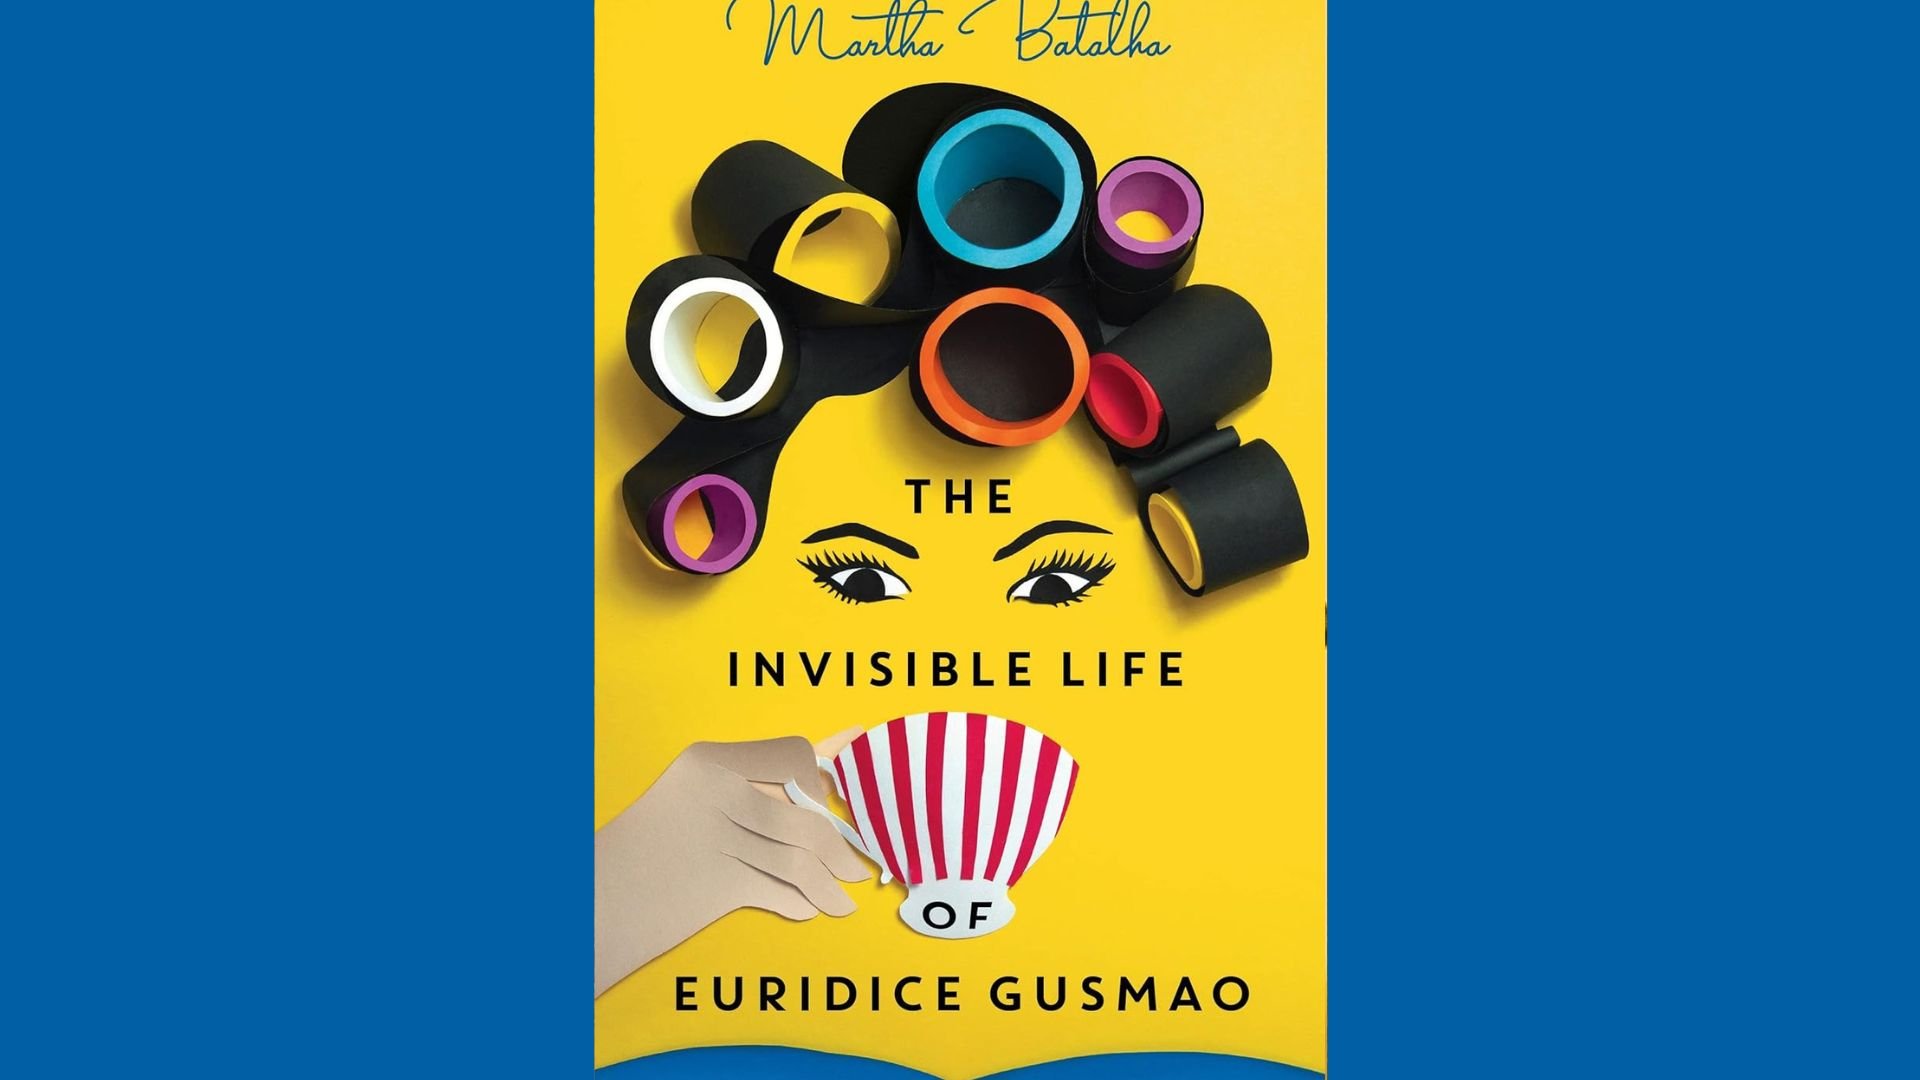 The cover of The Invisible Life of Euridice Gusmao by Martha Batalha